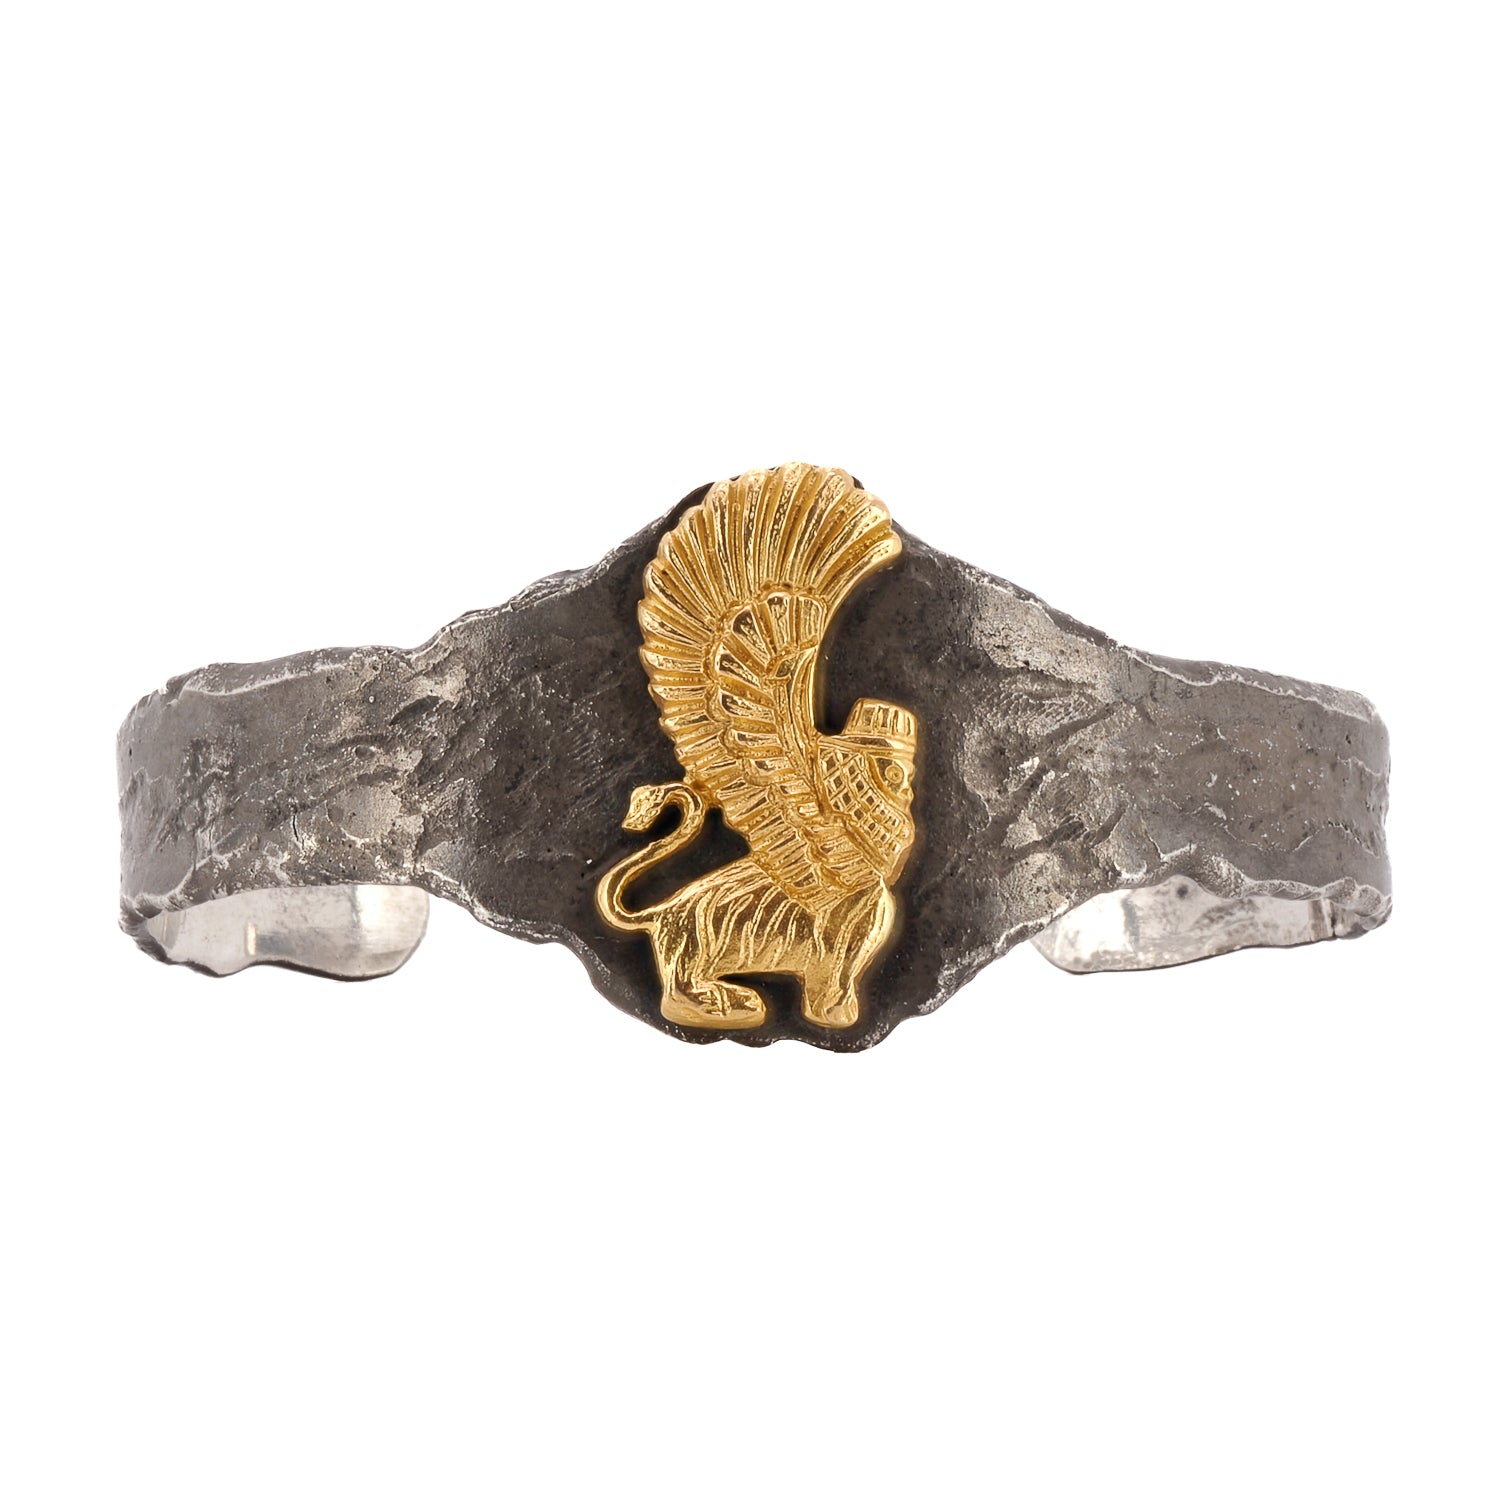 Luxury Handmade Jewelry: Assyrian Gold Lion Cuff Bracelet in Sterling Silver and 18k Gold